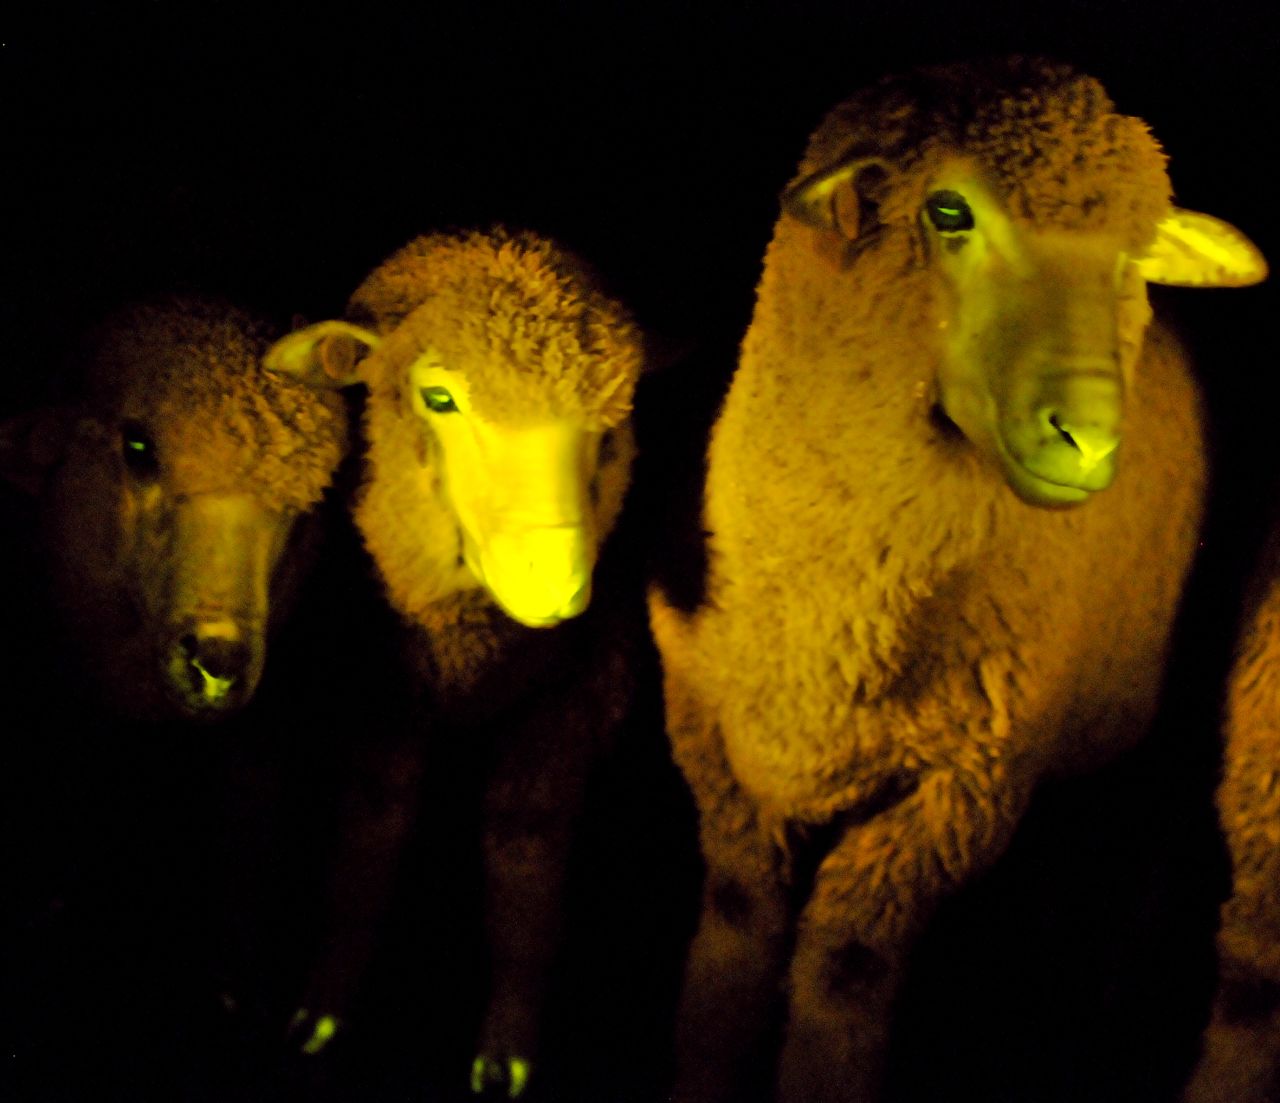 In total, nine lambs were born with this genetic modification. They are now 6 months old and in perfect condition, researchers said. These lambs look like regular lambs except that they glow when exposed to ultraviolet light, the scientists said. 